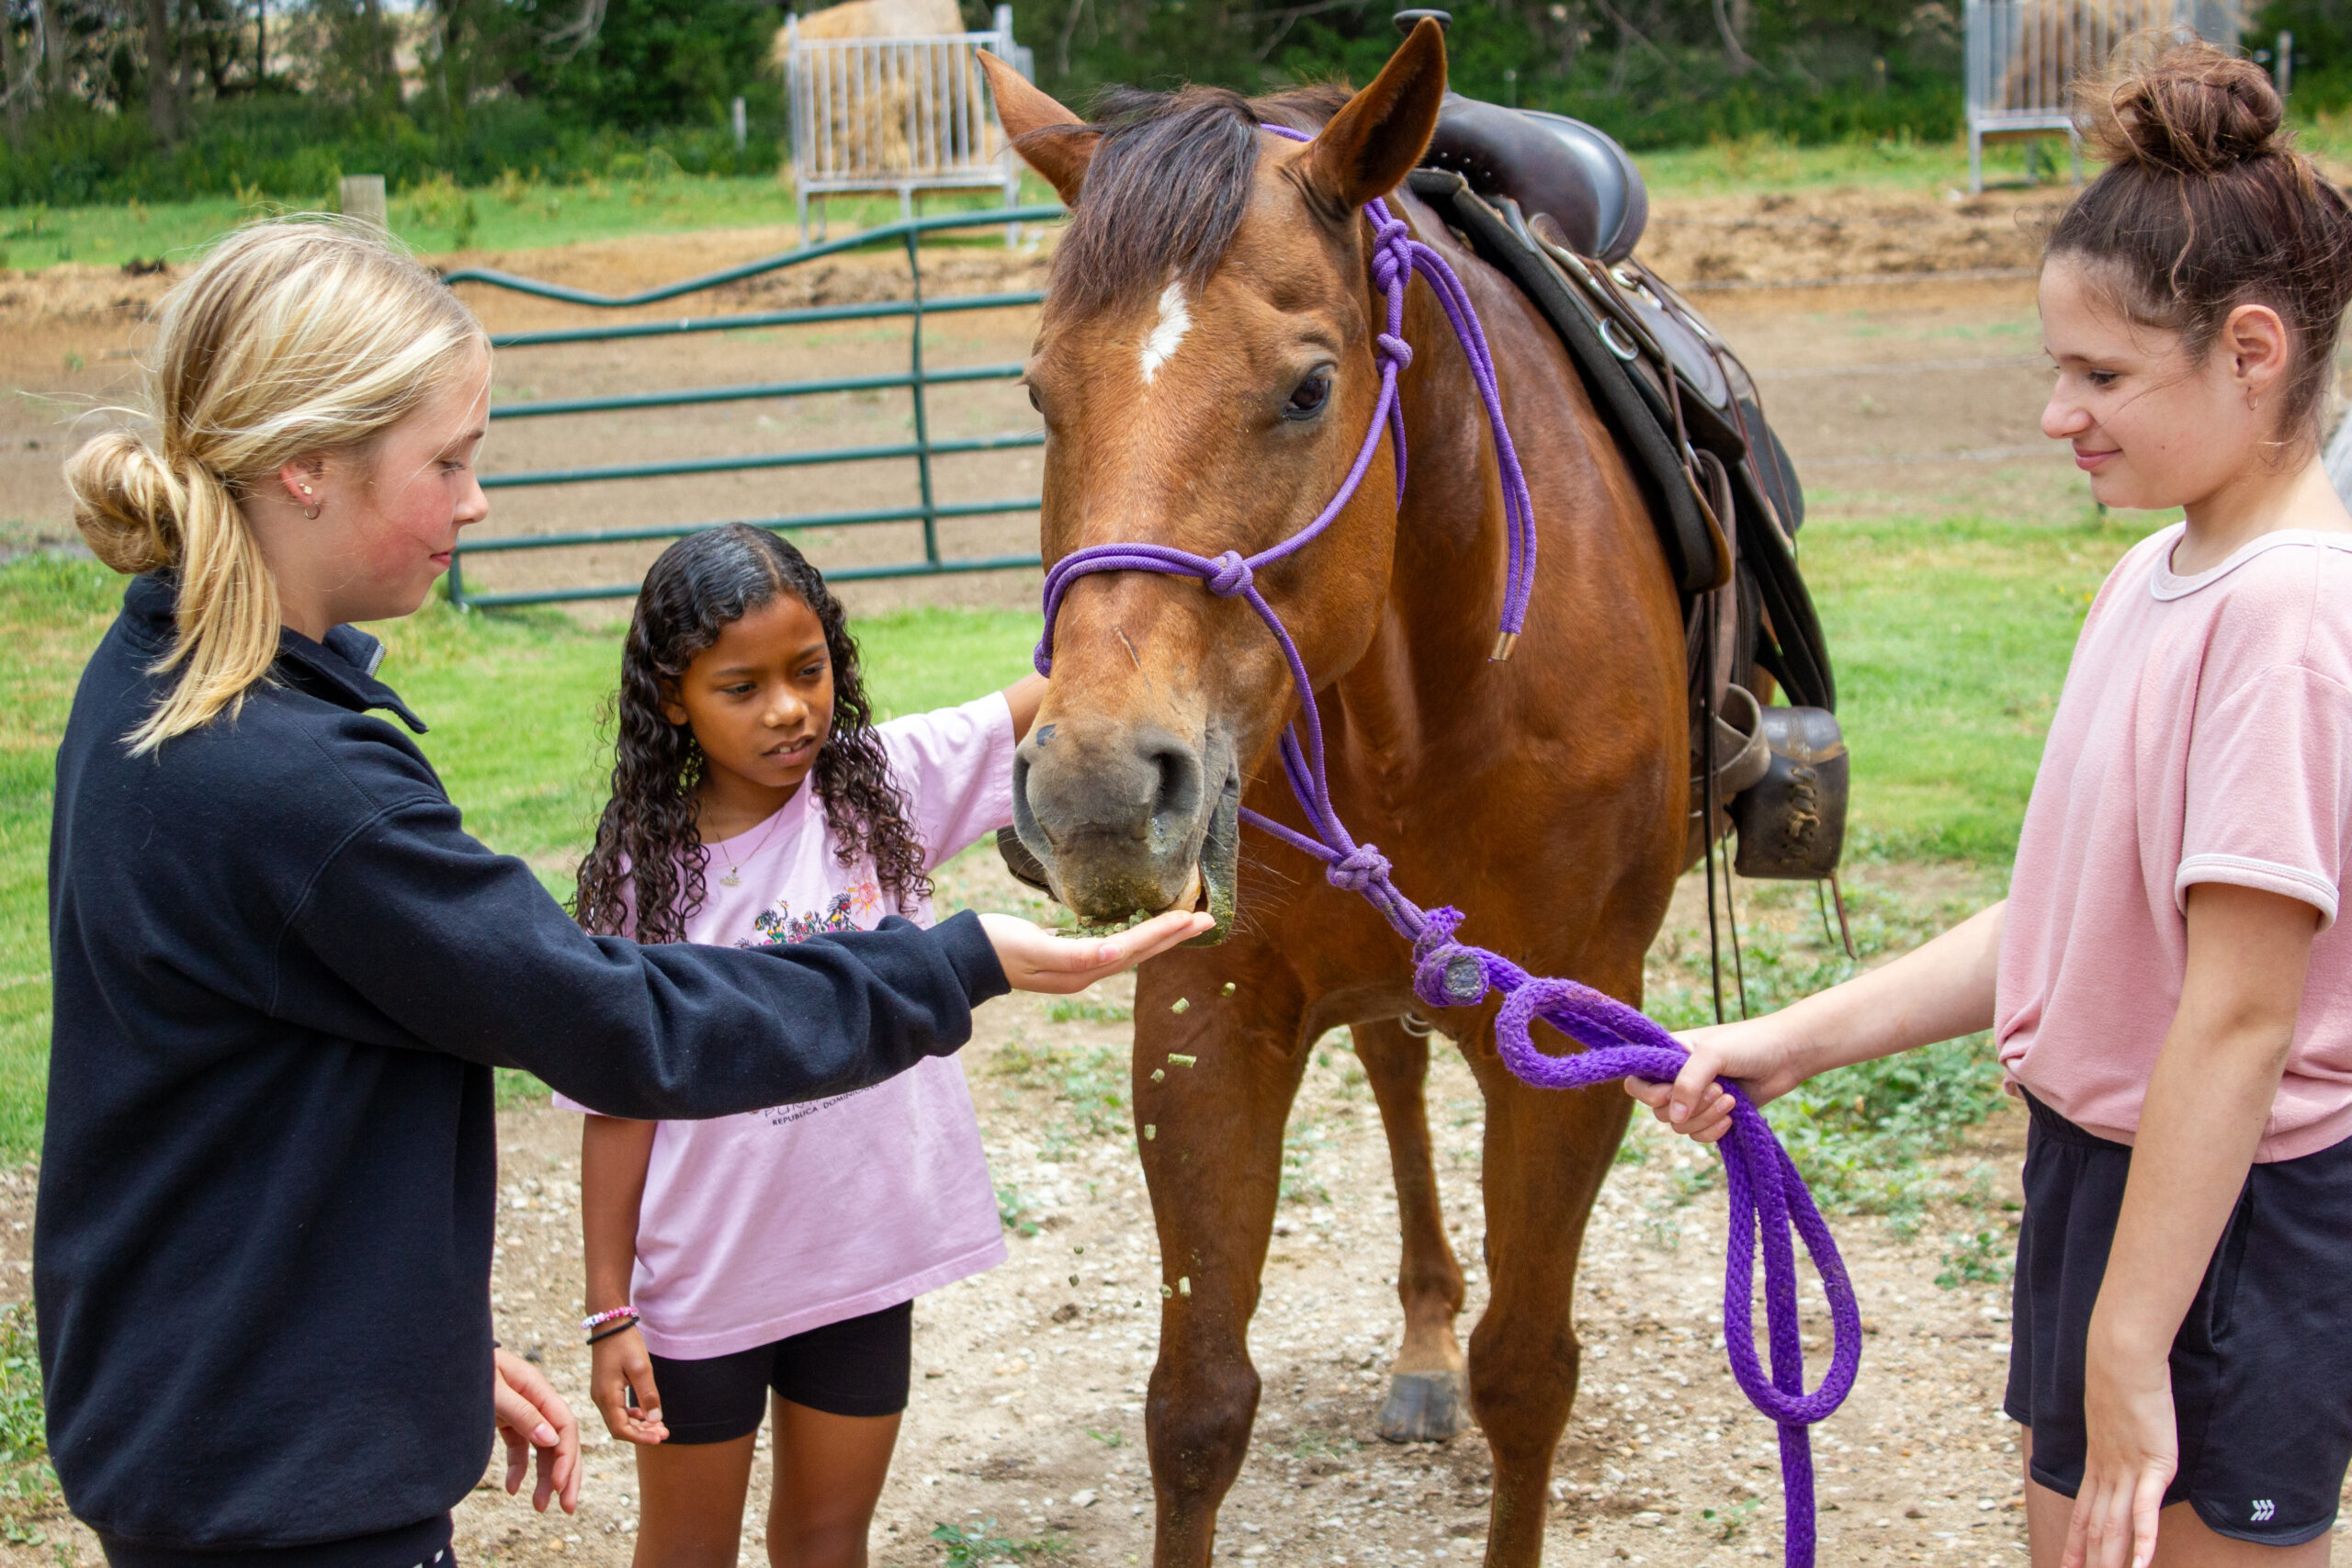 Three children are interacting with a brown horse outdoors, in a paddock. One child is feeding the horse from their hand, while another holds the horse's reins. A third child standing next to them is also looking at the horse, with green grass and a fence in the background.